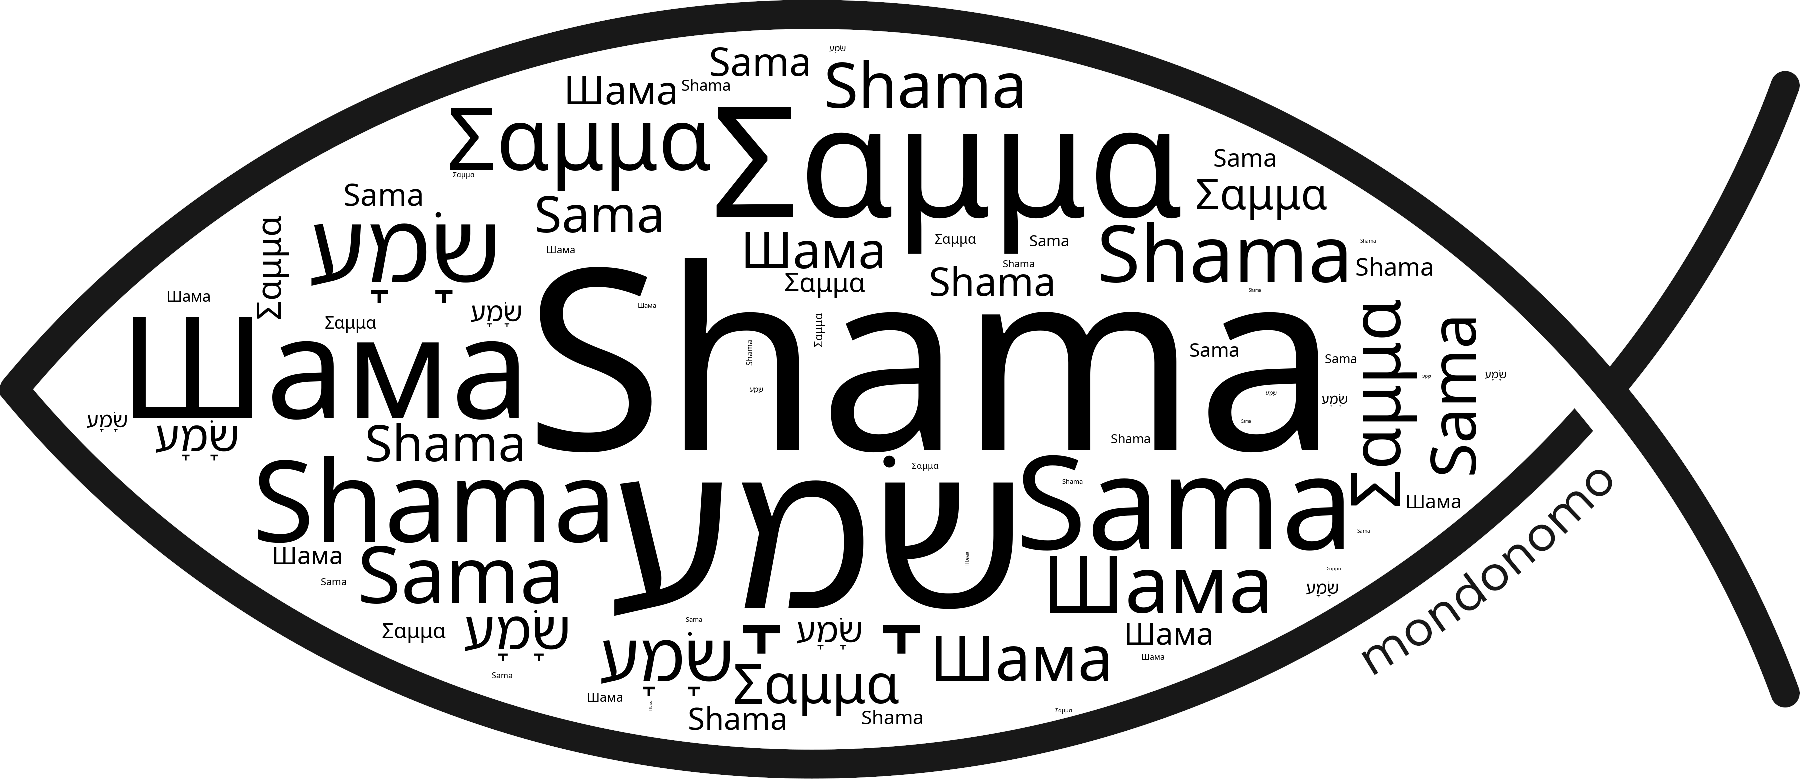 Name Shama in the world's Bibles